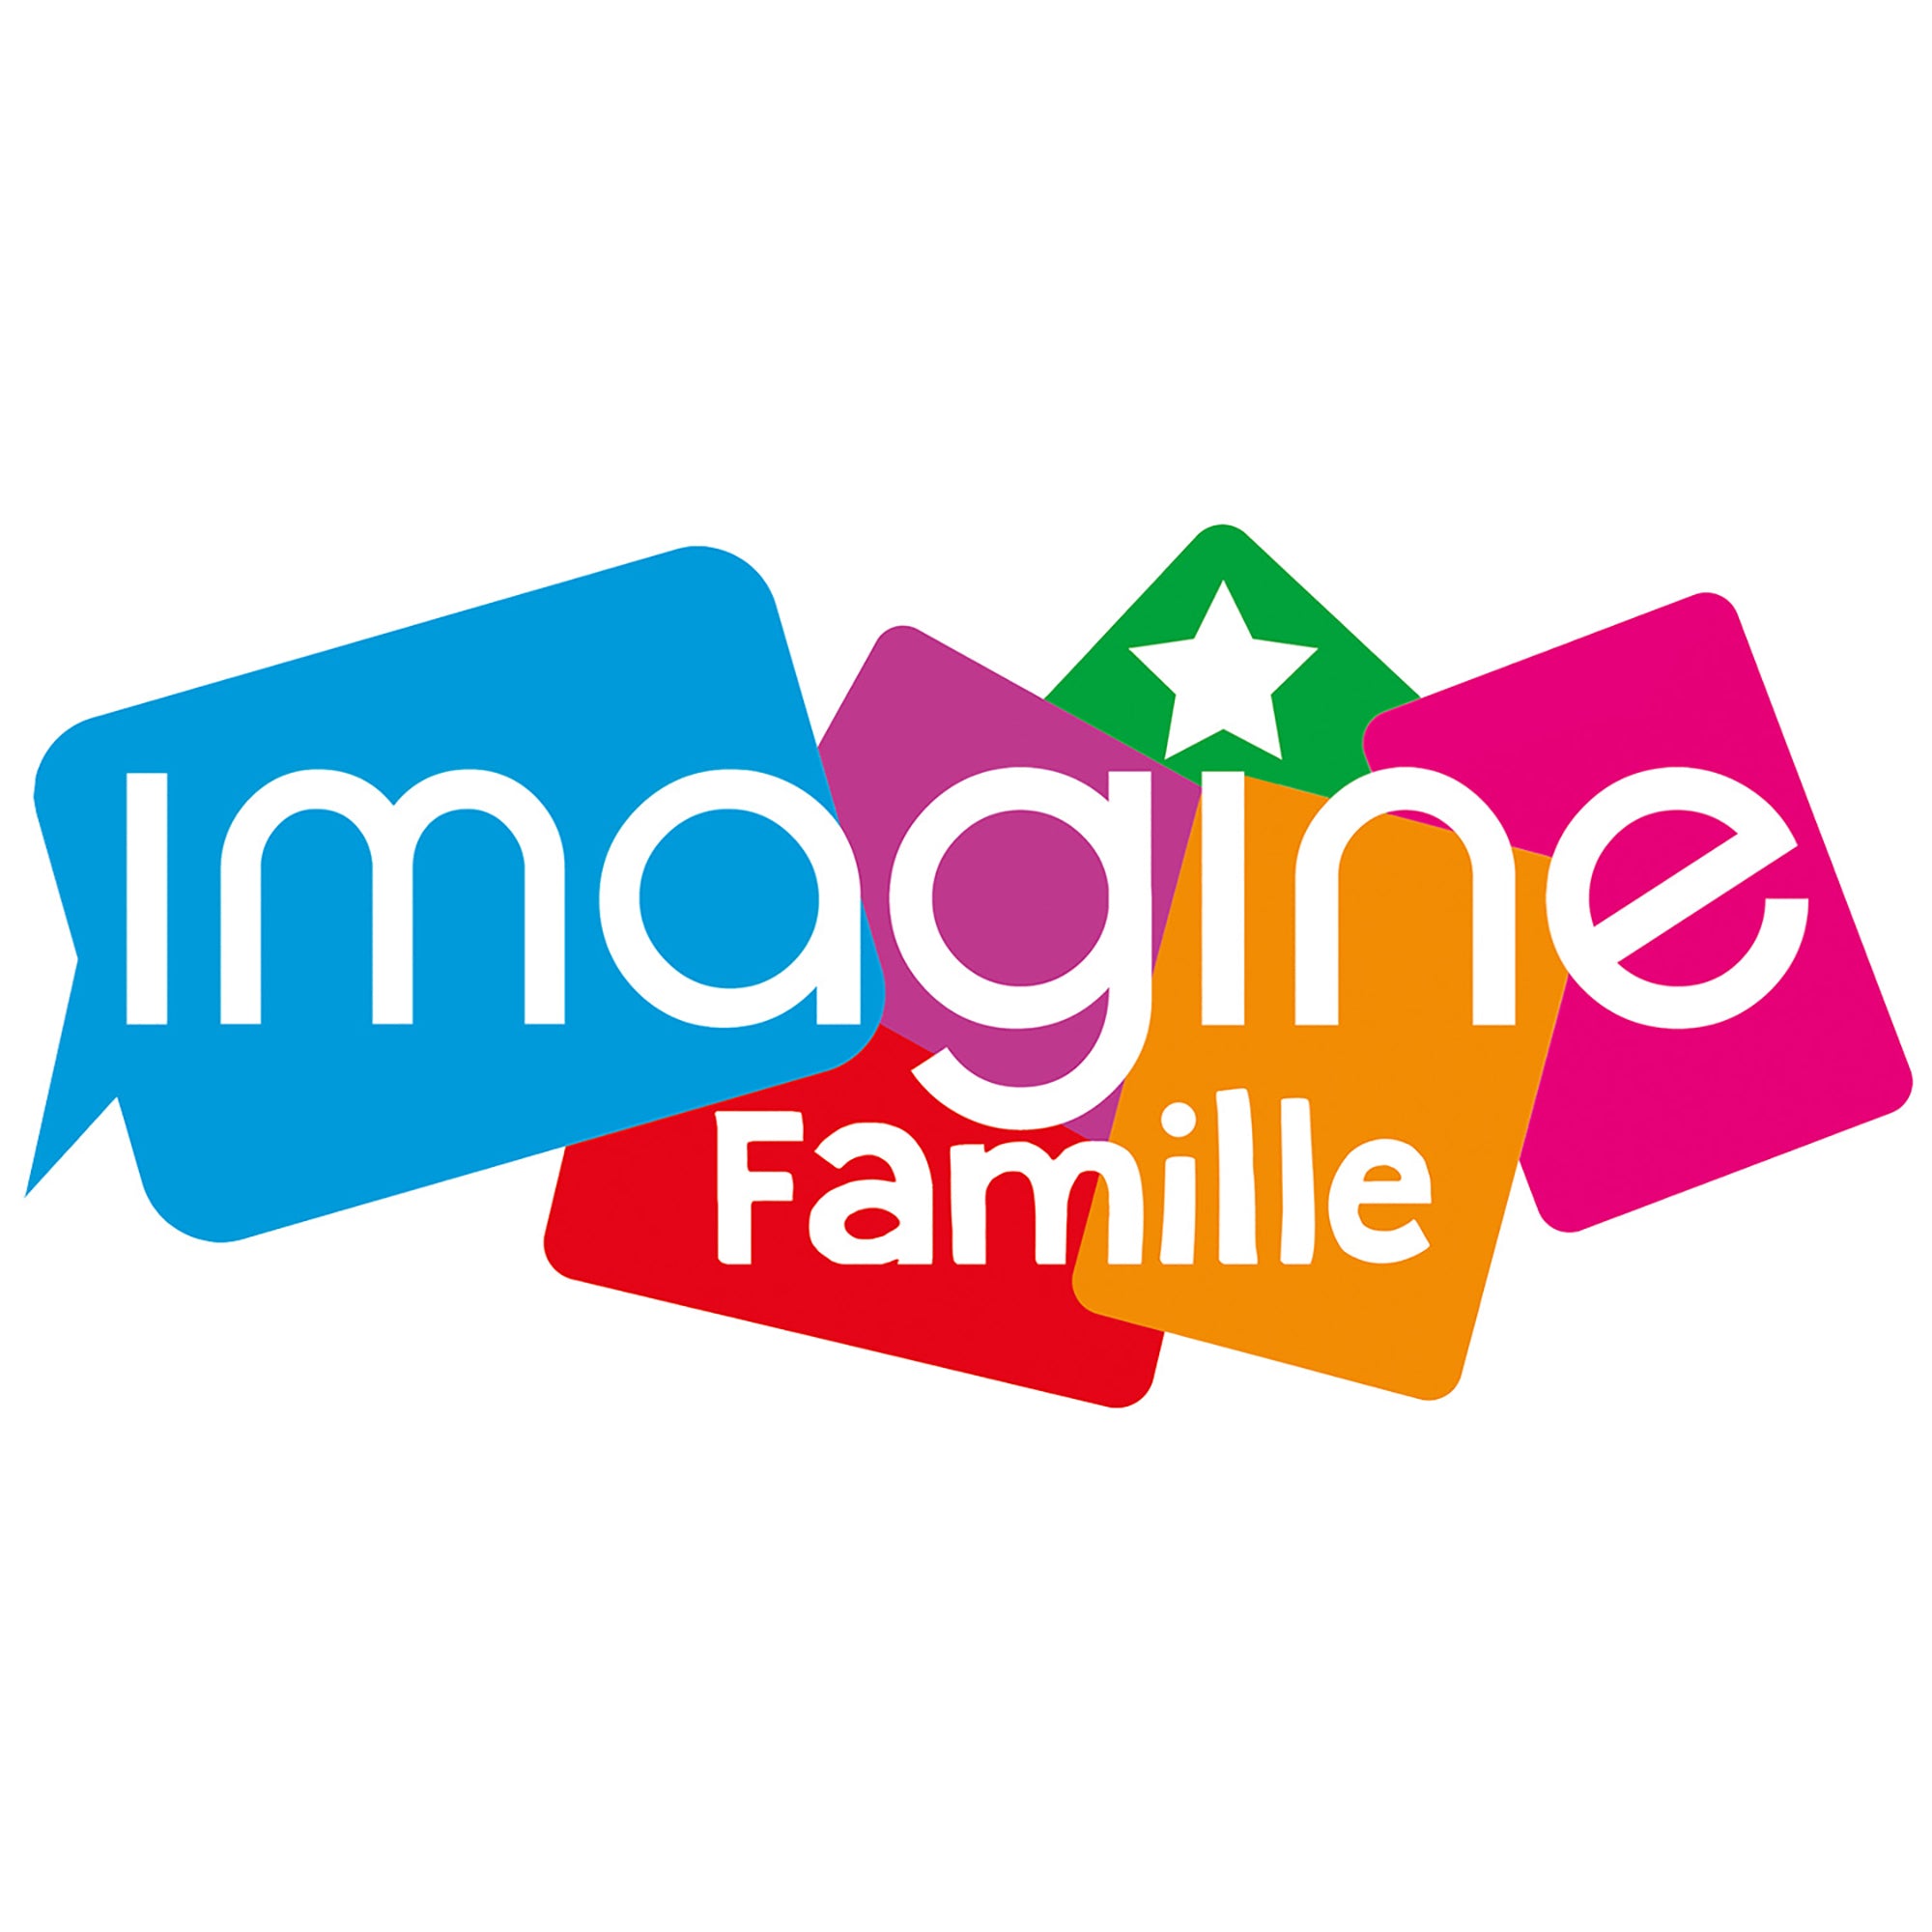 Imagine - Famille - French Version 8+